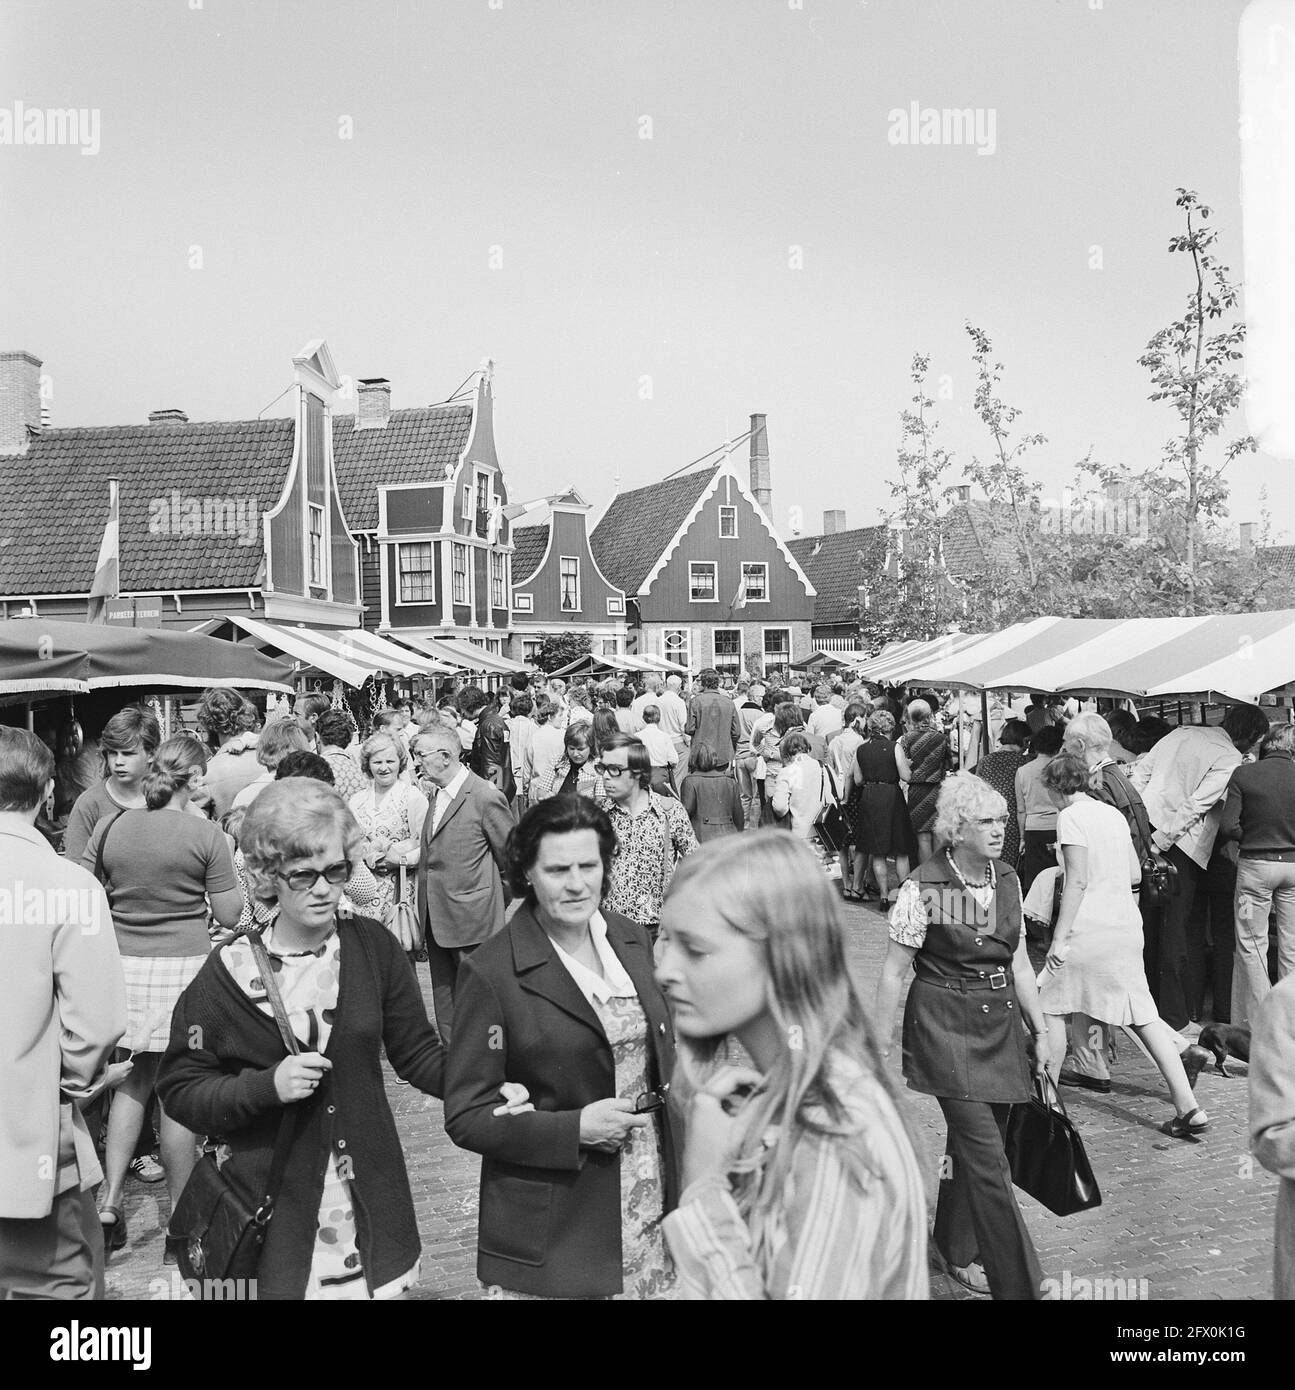 Zaanse year market on Zaanse Schans, overview, August 18, 1973, year markets, overviews, The Netherlands, 20th century press agency photo, news to remember, documentary, historic photography 1945-1990, visual stories, human history of the Twentieth Century, capturing moments in time Stock Photo